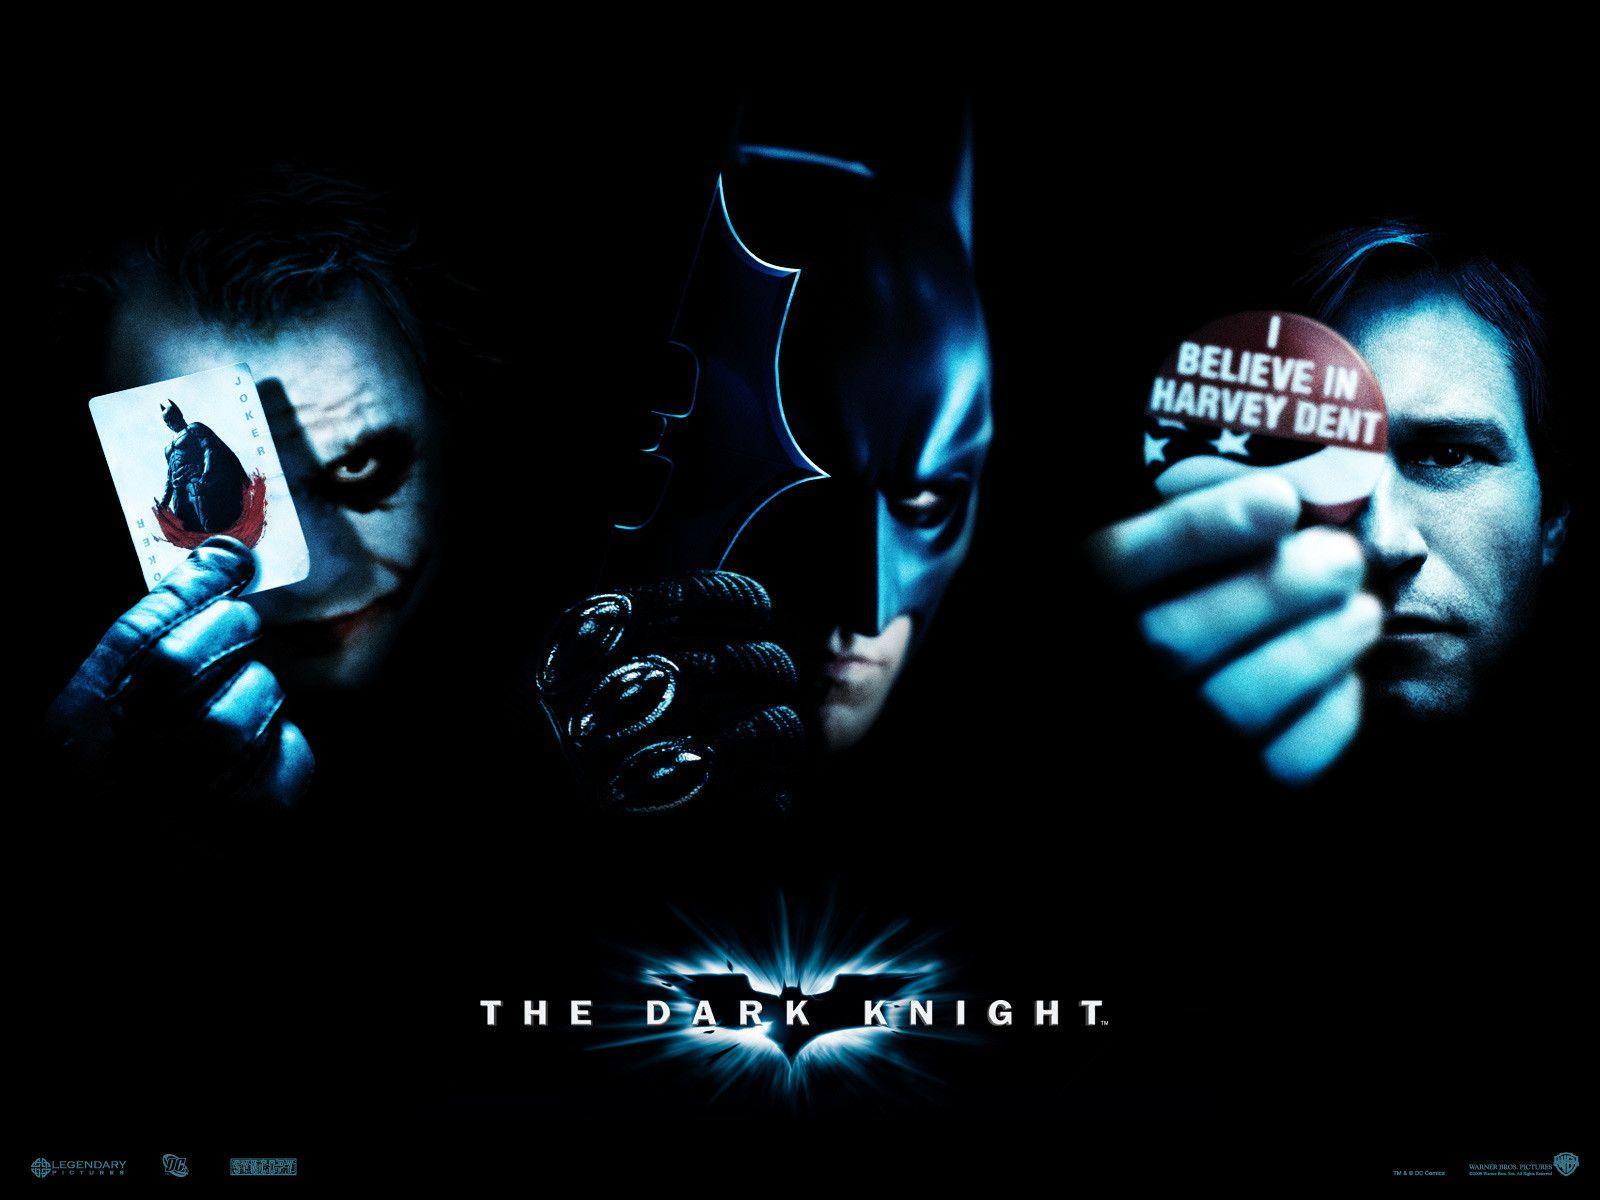 The Dark Knight Wallpapers